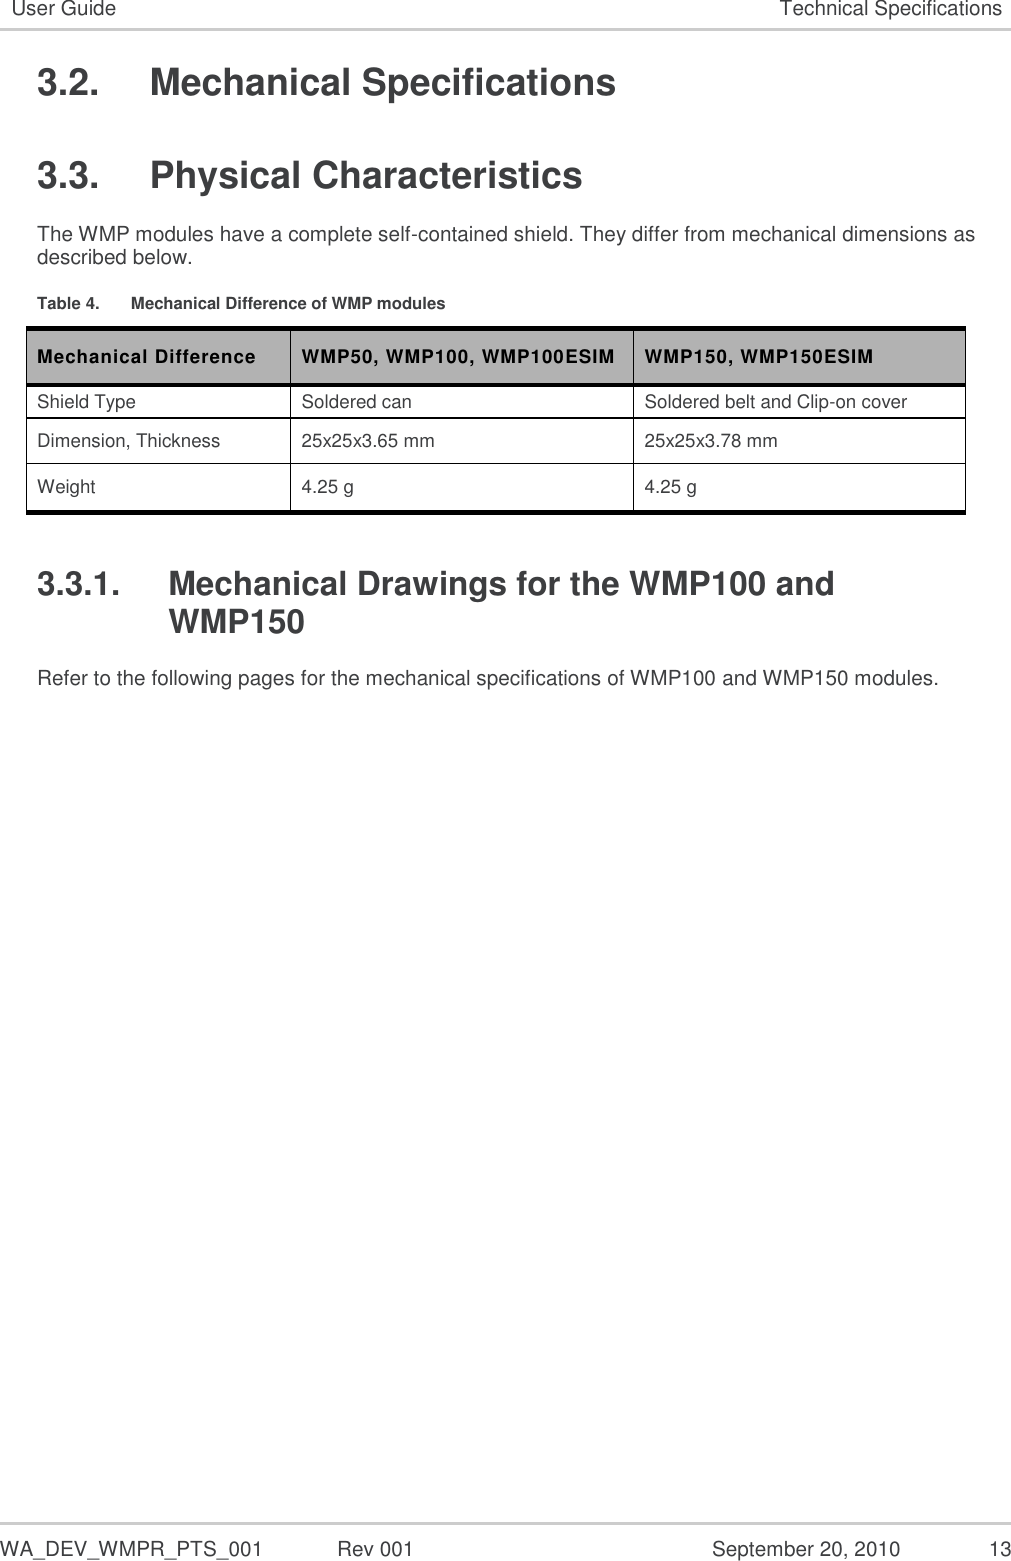   WA_DEV_WMPR_PTS_001  Rev 001  September 20, 2010  13 User Guide Technical Specifications 3.2.  Mechanical Specifications 3.3.  Physical Characteristics The WMP modules have a complete self-contained shield. They differ from mechanical dimensions as described below. Table 4.  Mechanical Difference of WMP modules Mechanical Difference WMP50, WMP100, WMP100ESIM WMP150, WMP150ESIM Shield Type Soldered can Soldered belt and Clip-on cover Dimension, Thickness 25x25x3.65 mm 25x25x3.78 mm Weight 4.25 g 4.25 g 3.3.1.  Mechanical Drawings for the WMP100 and WMP150 Refer to the following pages for the mechanical specifications of WMP100 and WMP150 modules. 